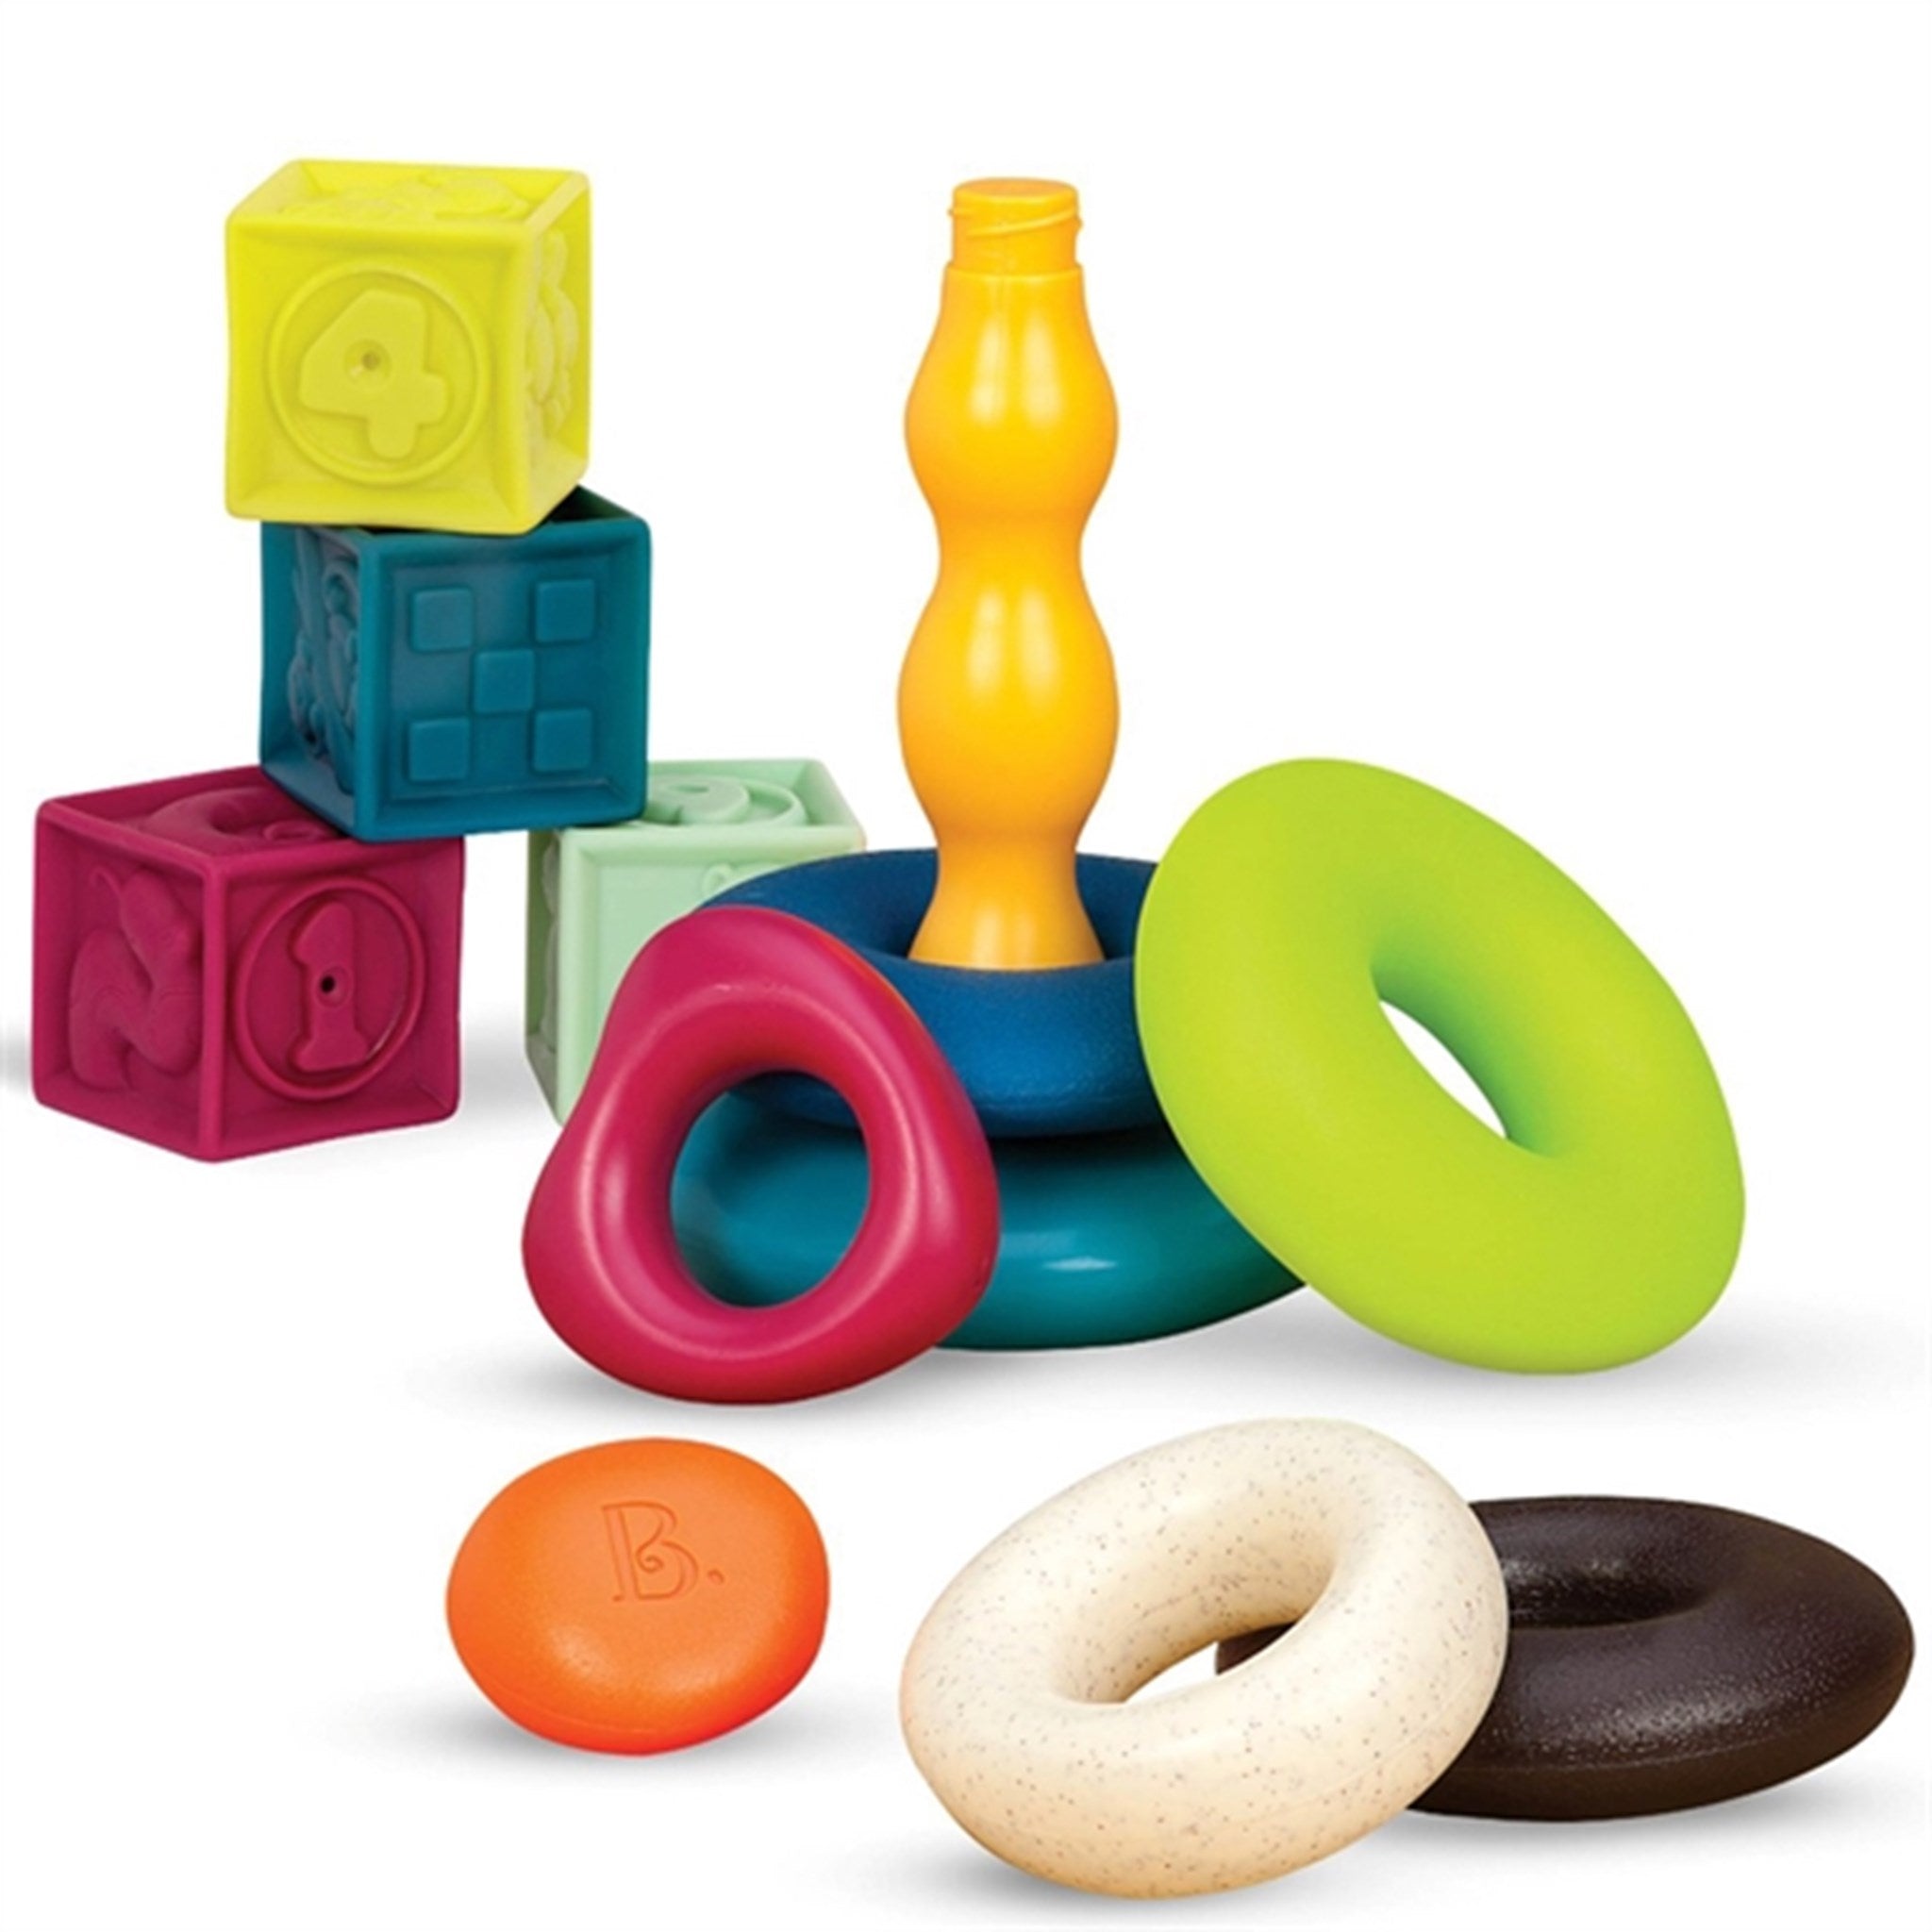 B-toys Building Blocks And Stacking Toy 2